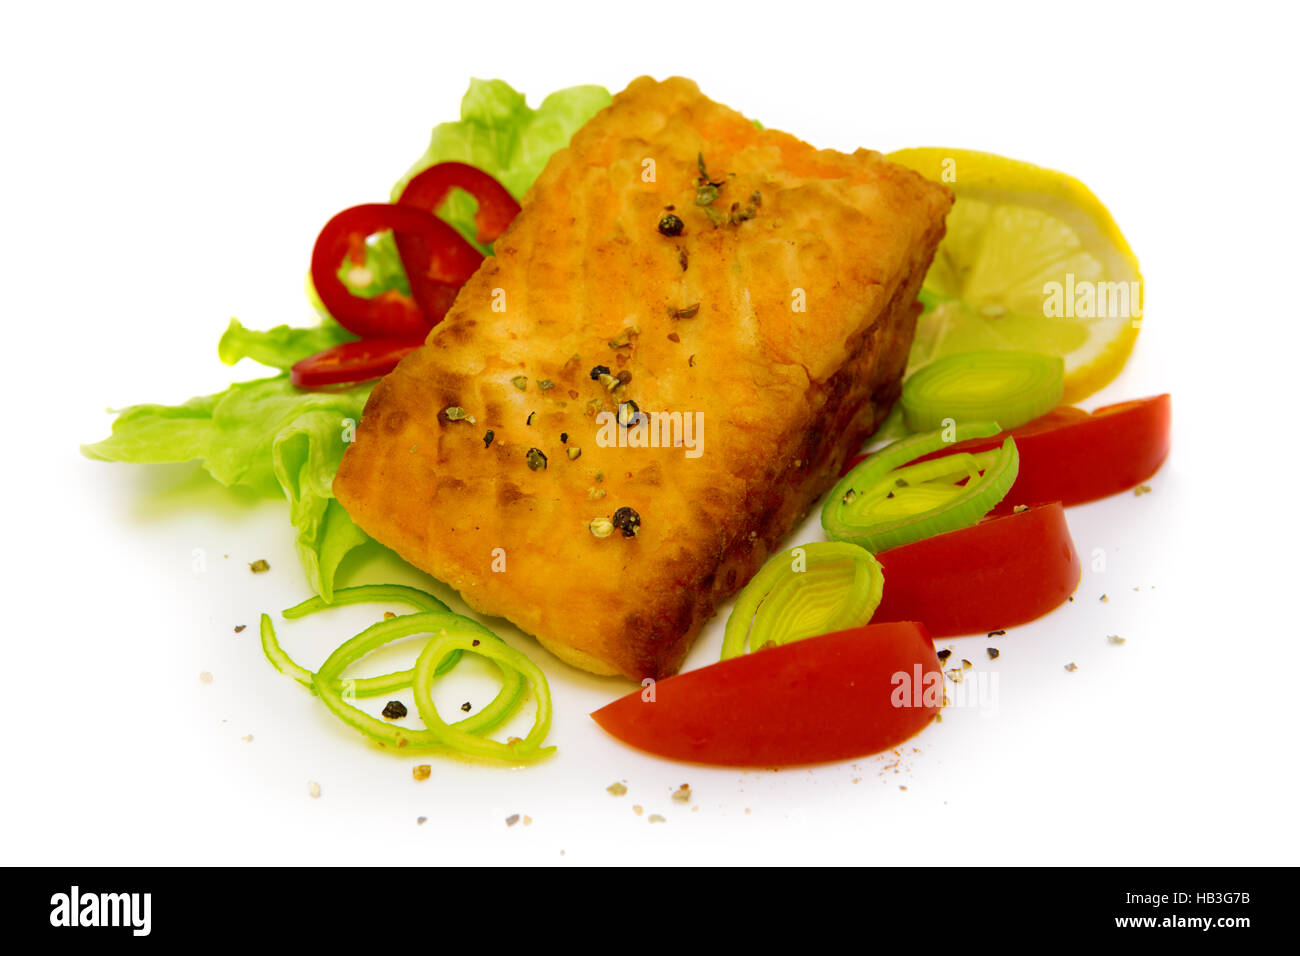 Roasted salmon fillets with fresh salad. Stock Photo